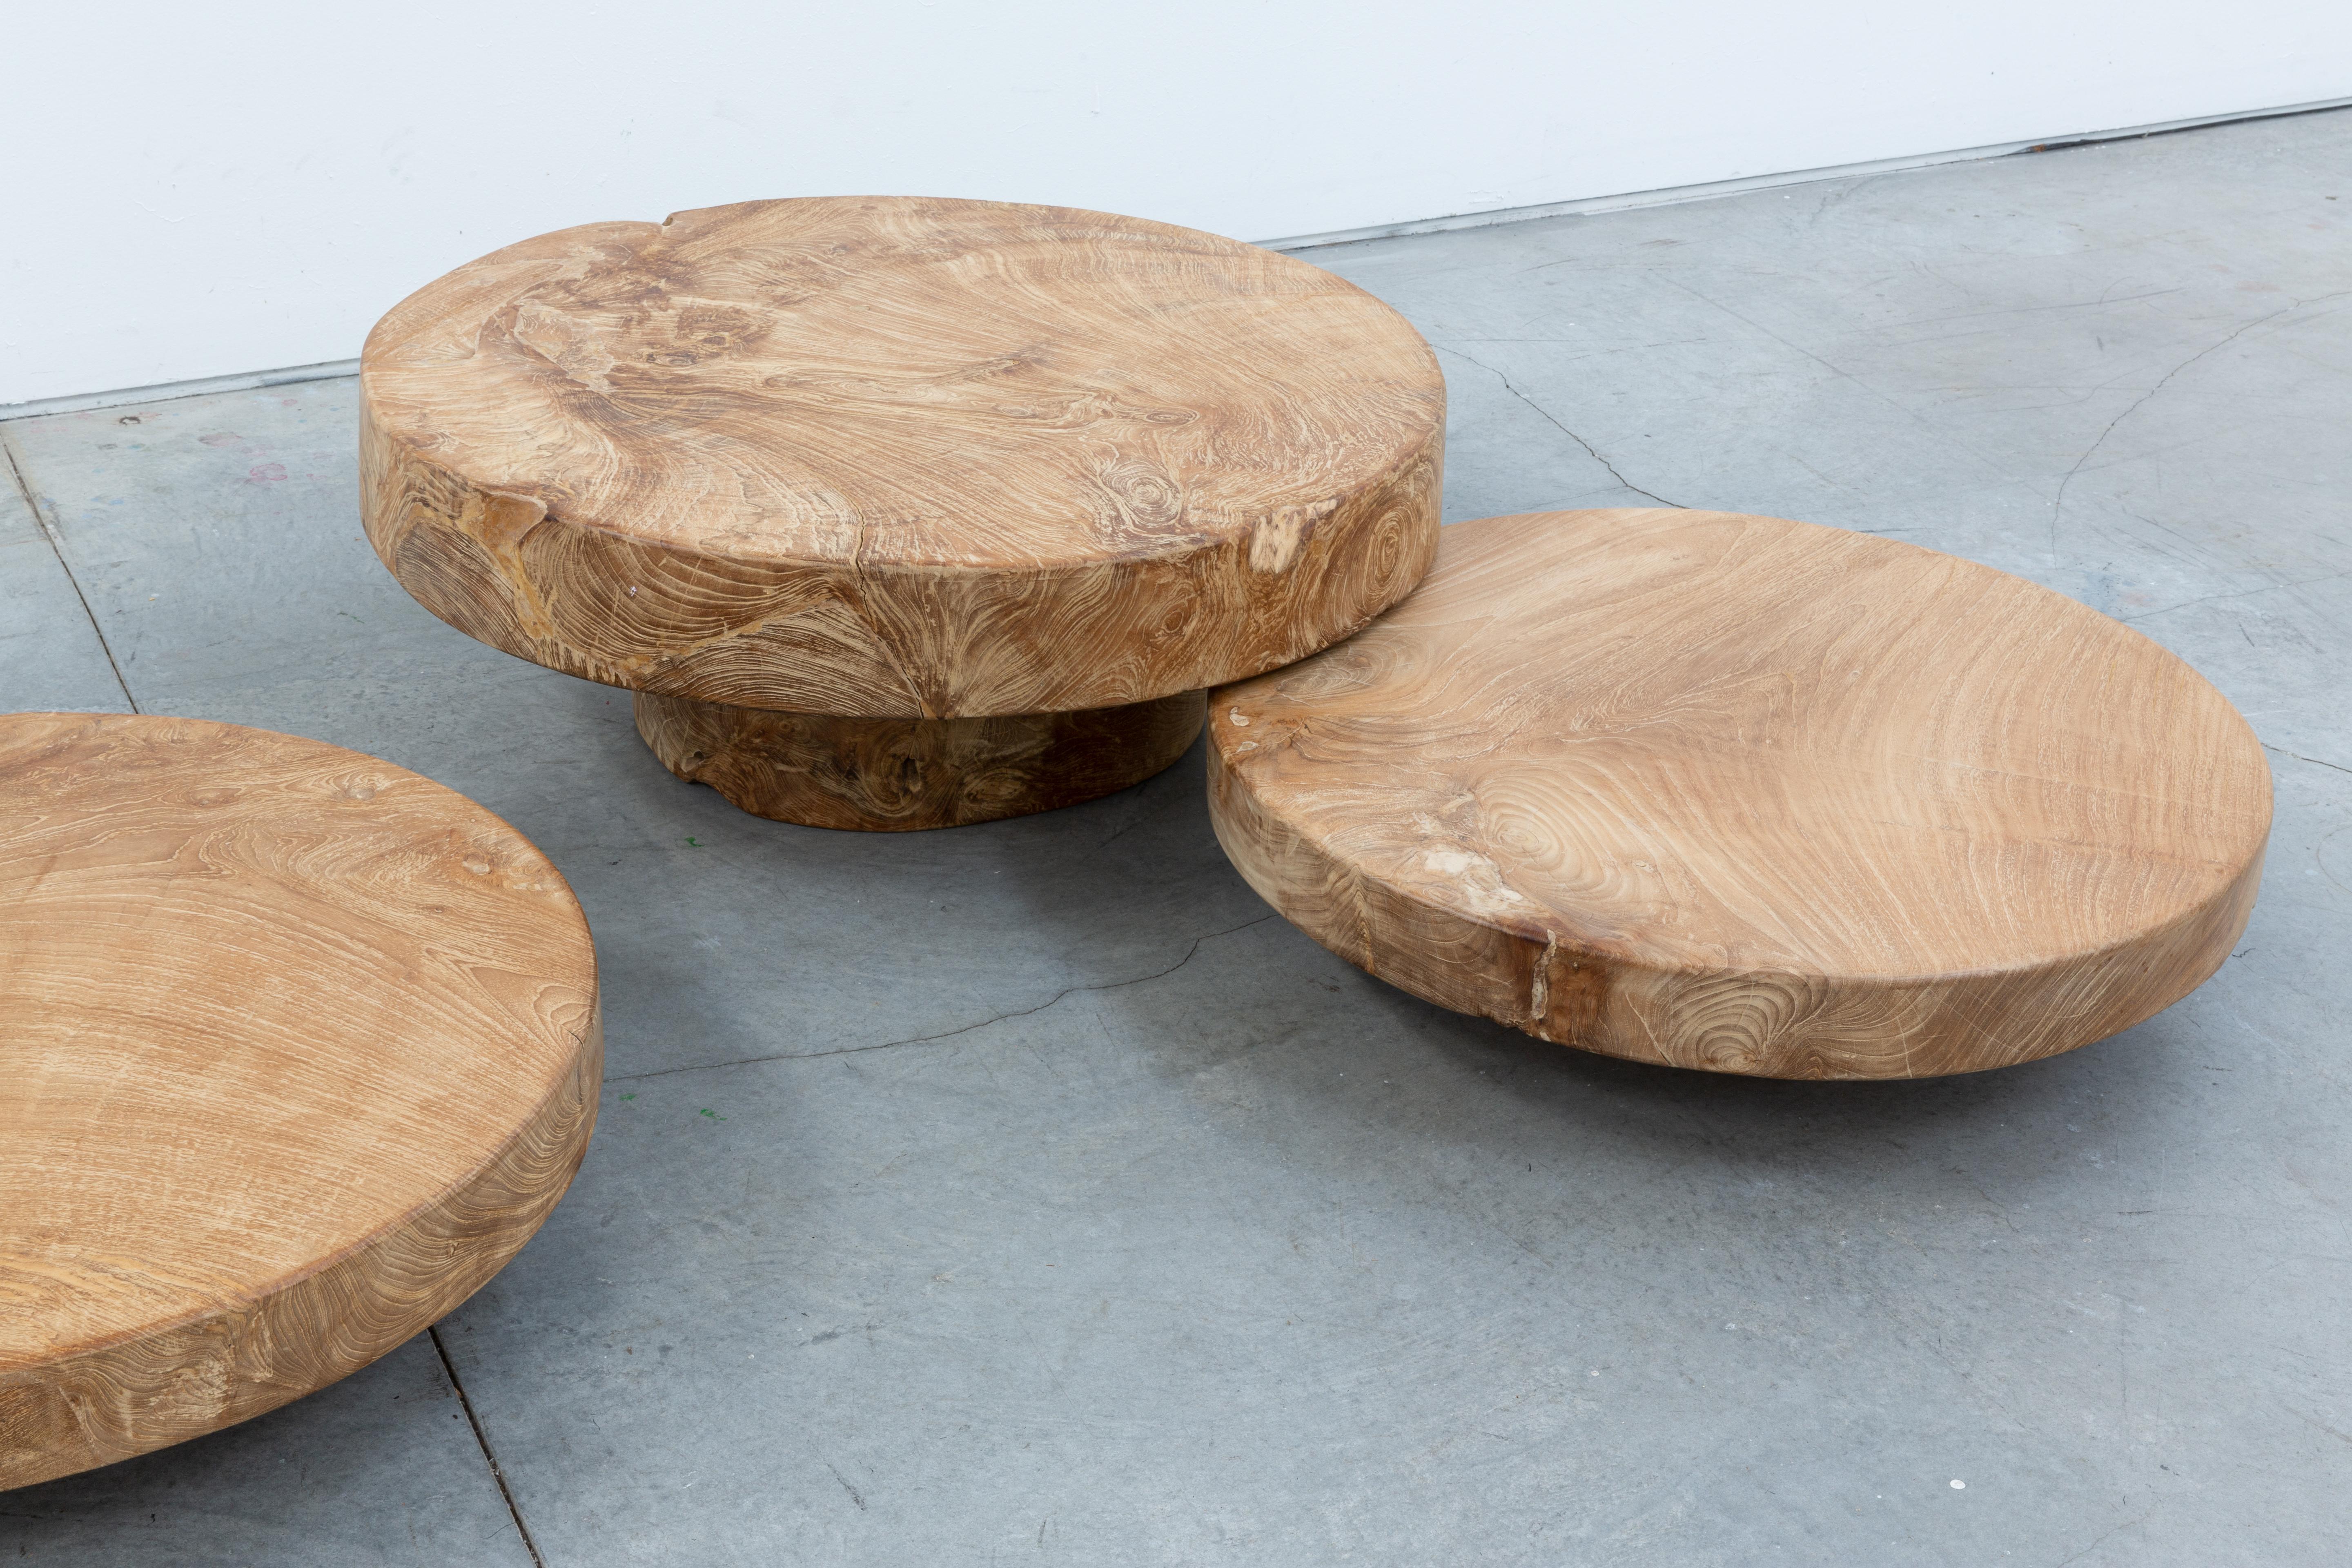 Balinese Low Slab Wood Coffee Table by CEU Studio, Represented by Tuleste Factory For Sale